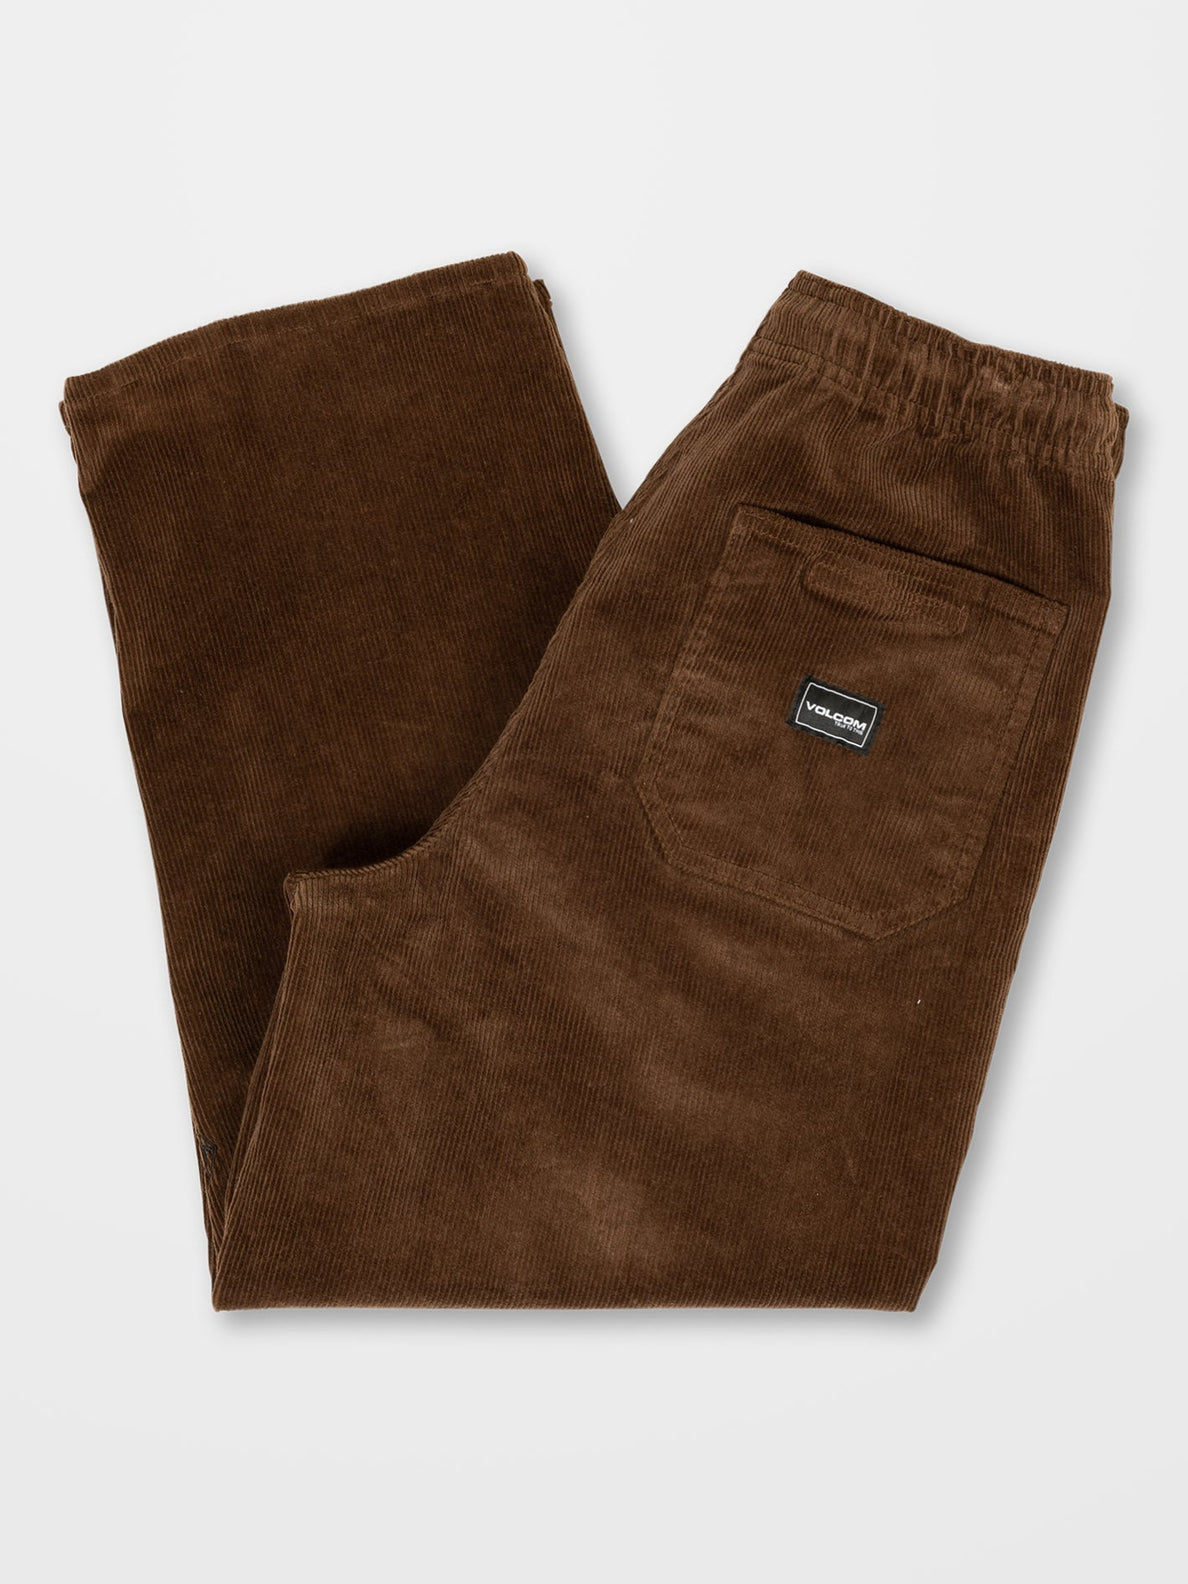 Outer Spaced Trousers - BURRO BROWN - (KIDS) (C1232232_BRR) [1]